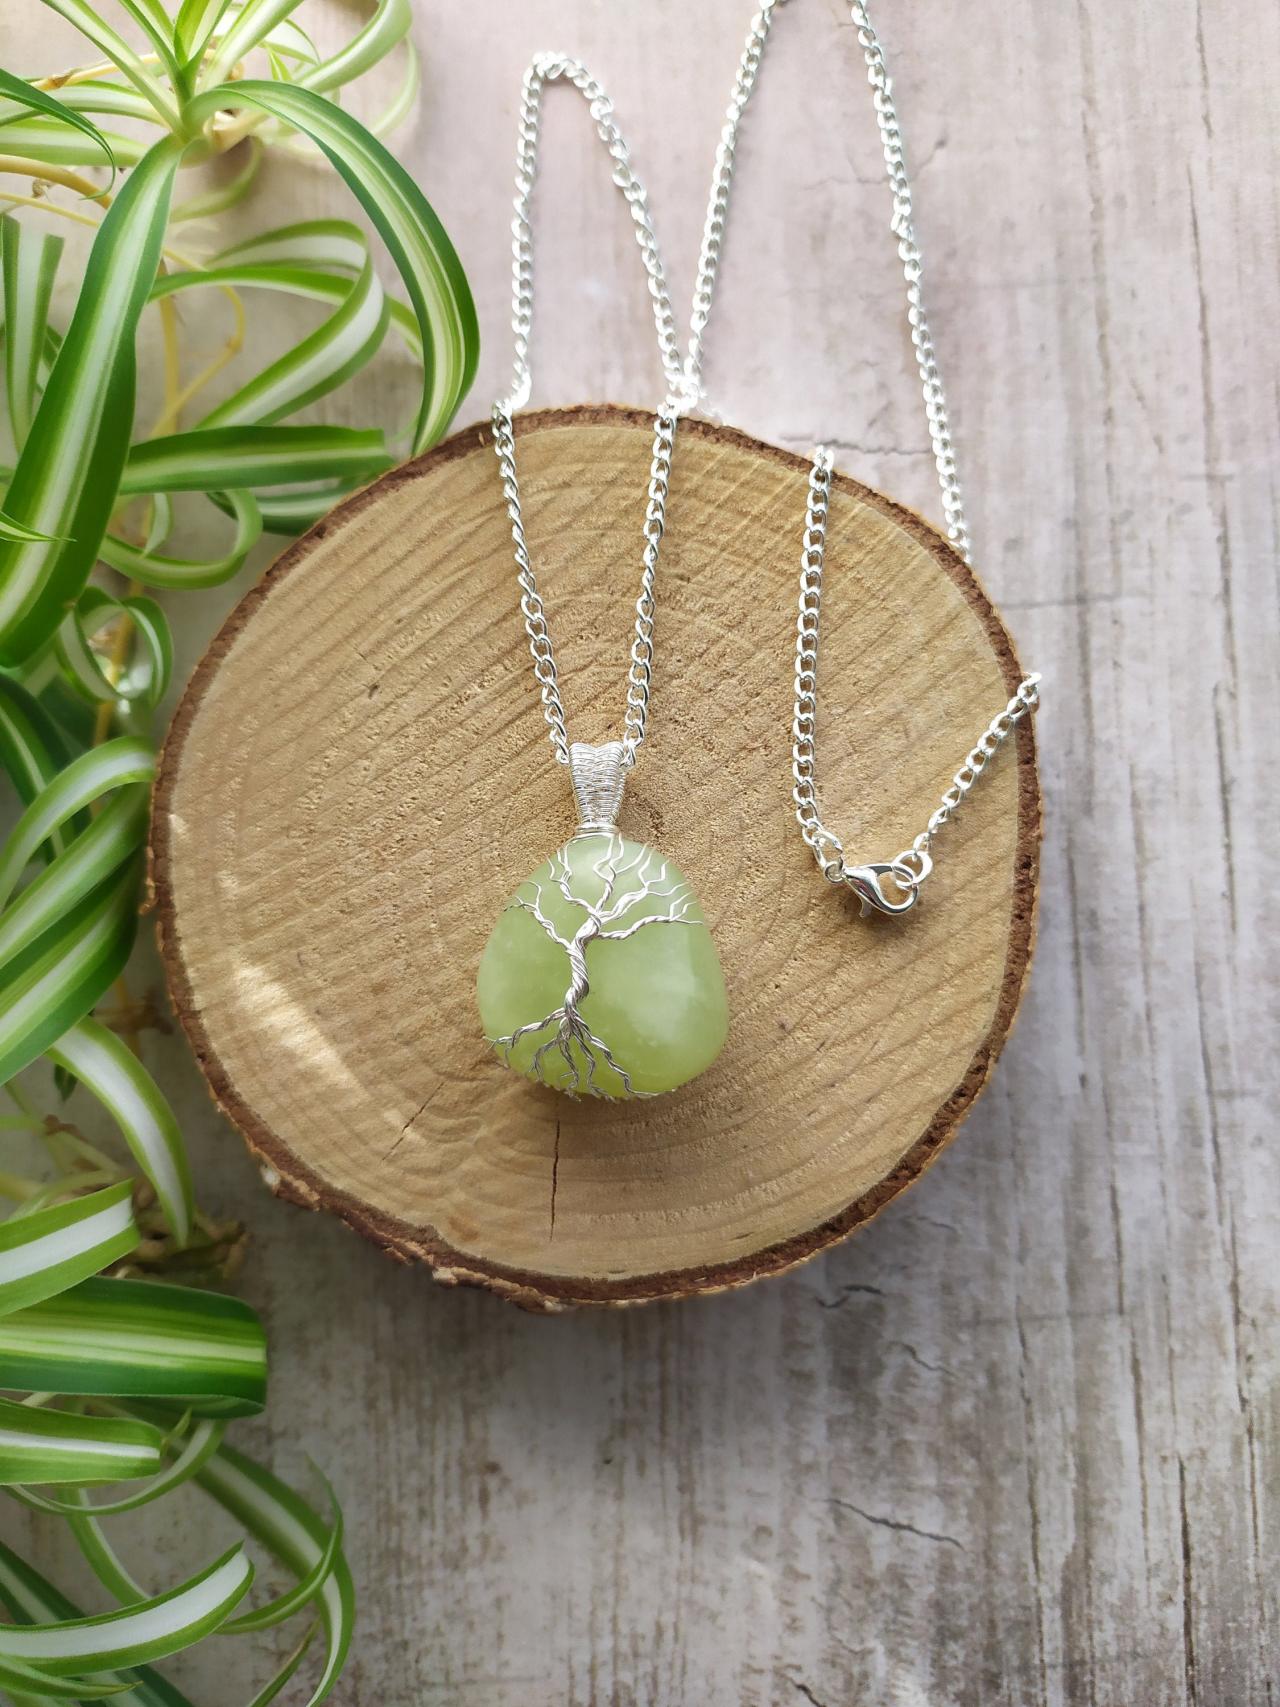 Spring Collection: Wire Wrapped Tree Of Life Pendant, Green Boho Gemstone Necklace,dainty Silver Wire Wrapped Tree Serpentine Stone Necklace